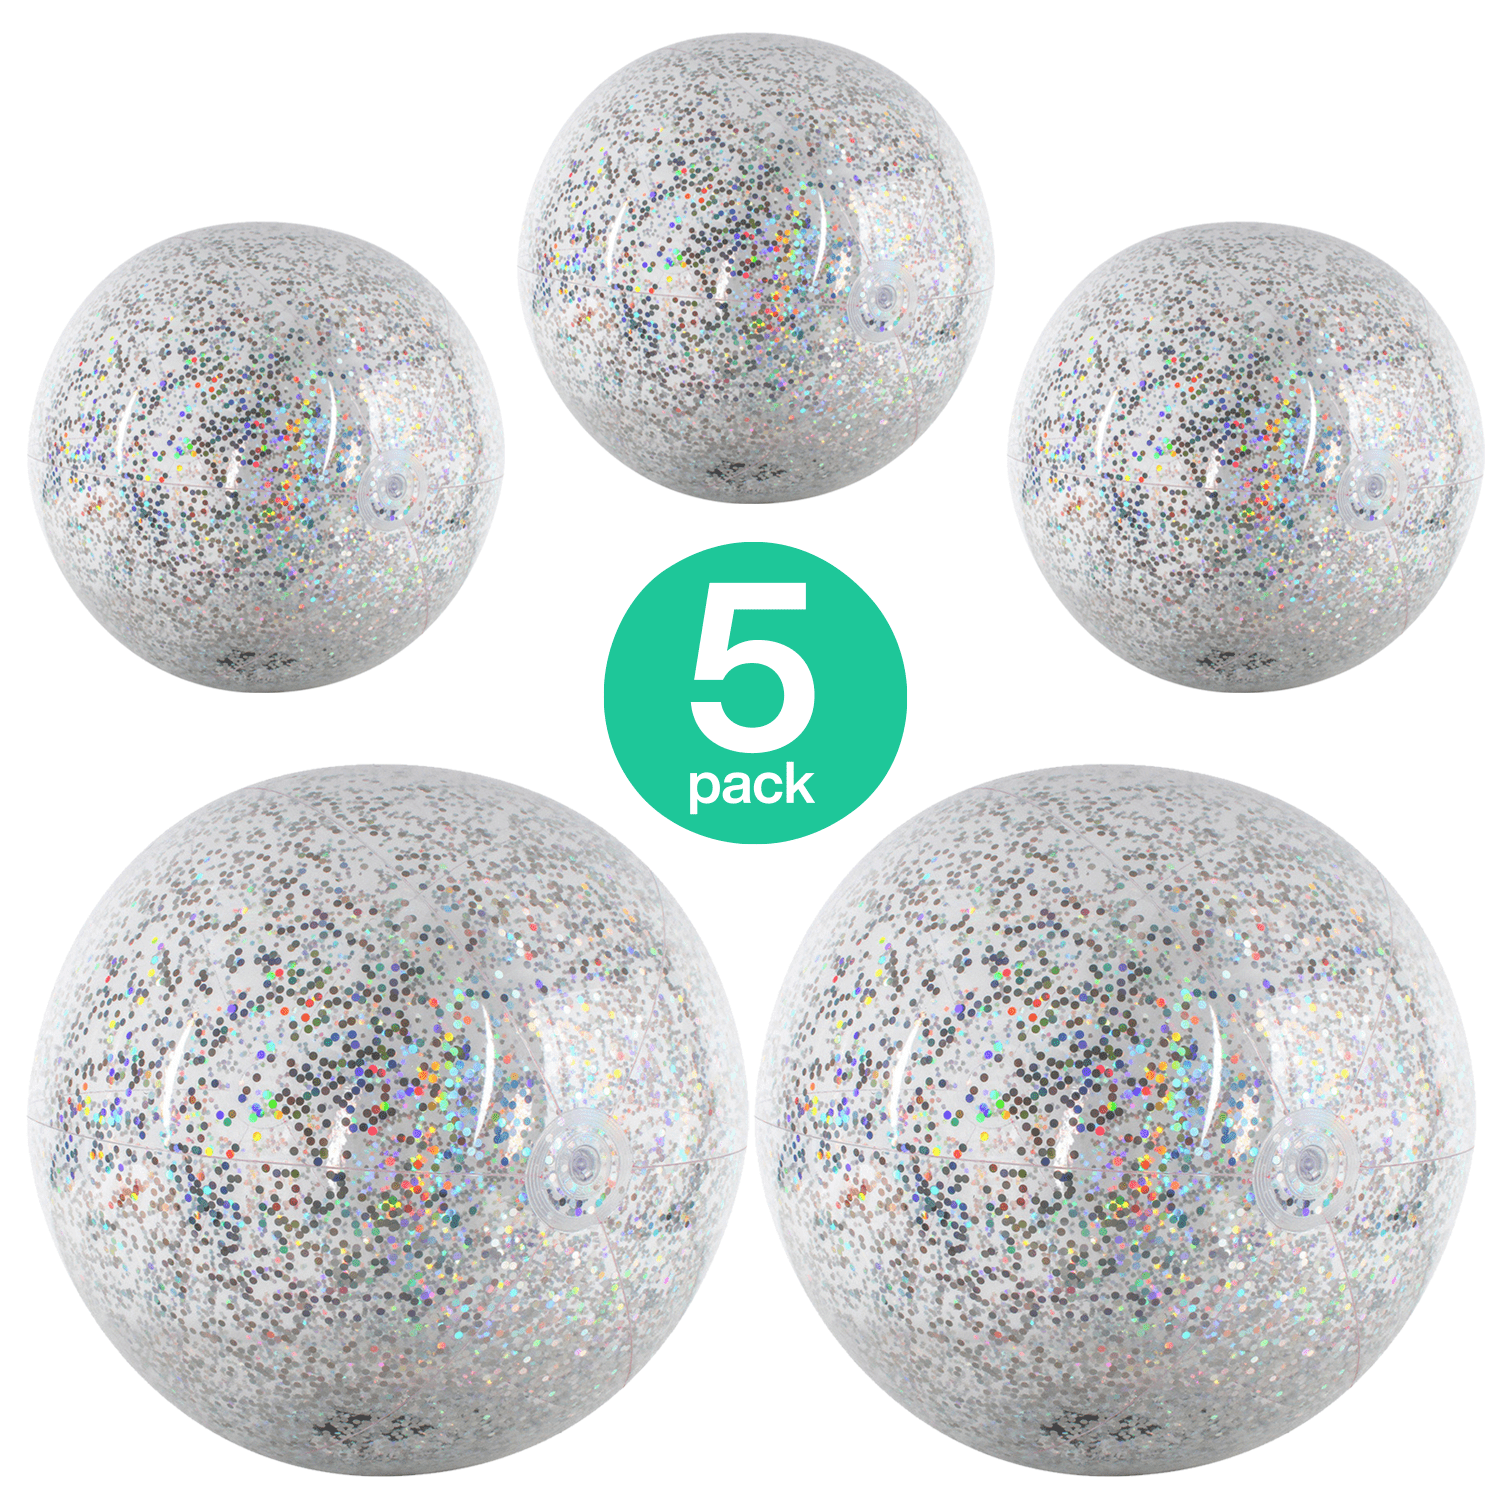 Sequin Beach Ball 5 Pack Giant Confetti Glitter Inflatable Summer Outdoor Pool 